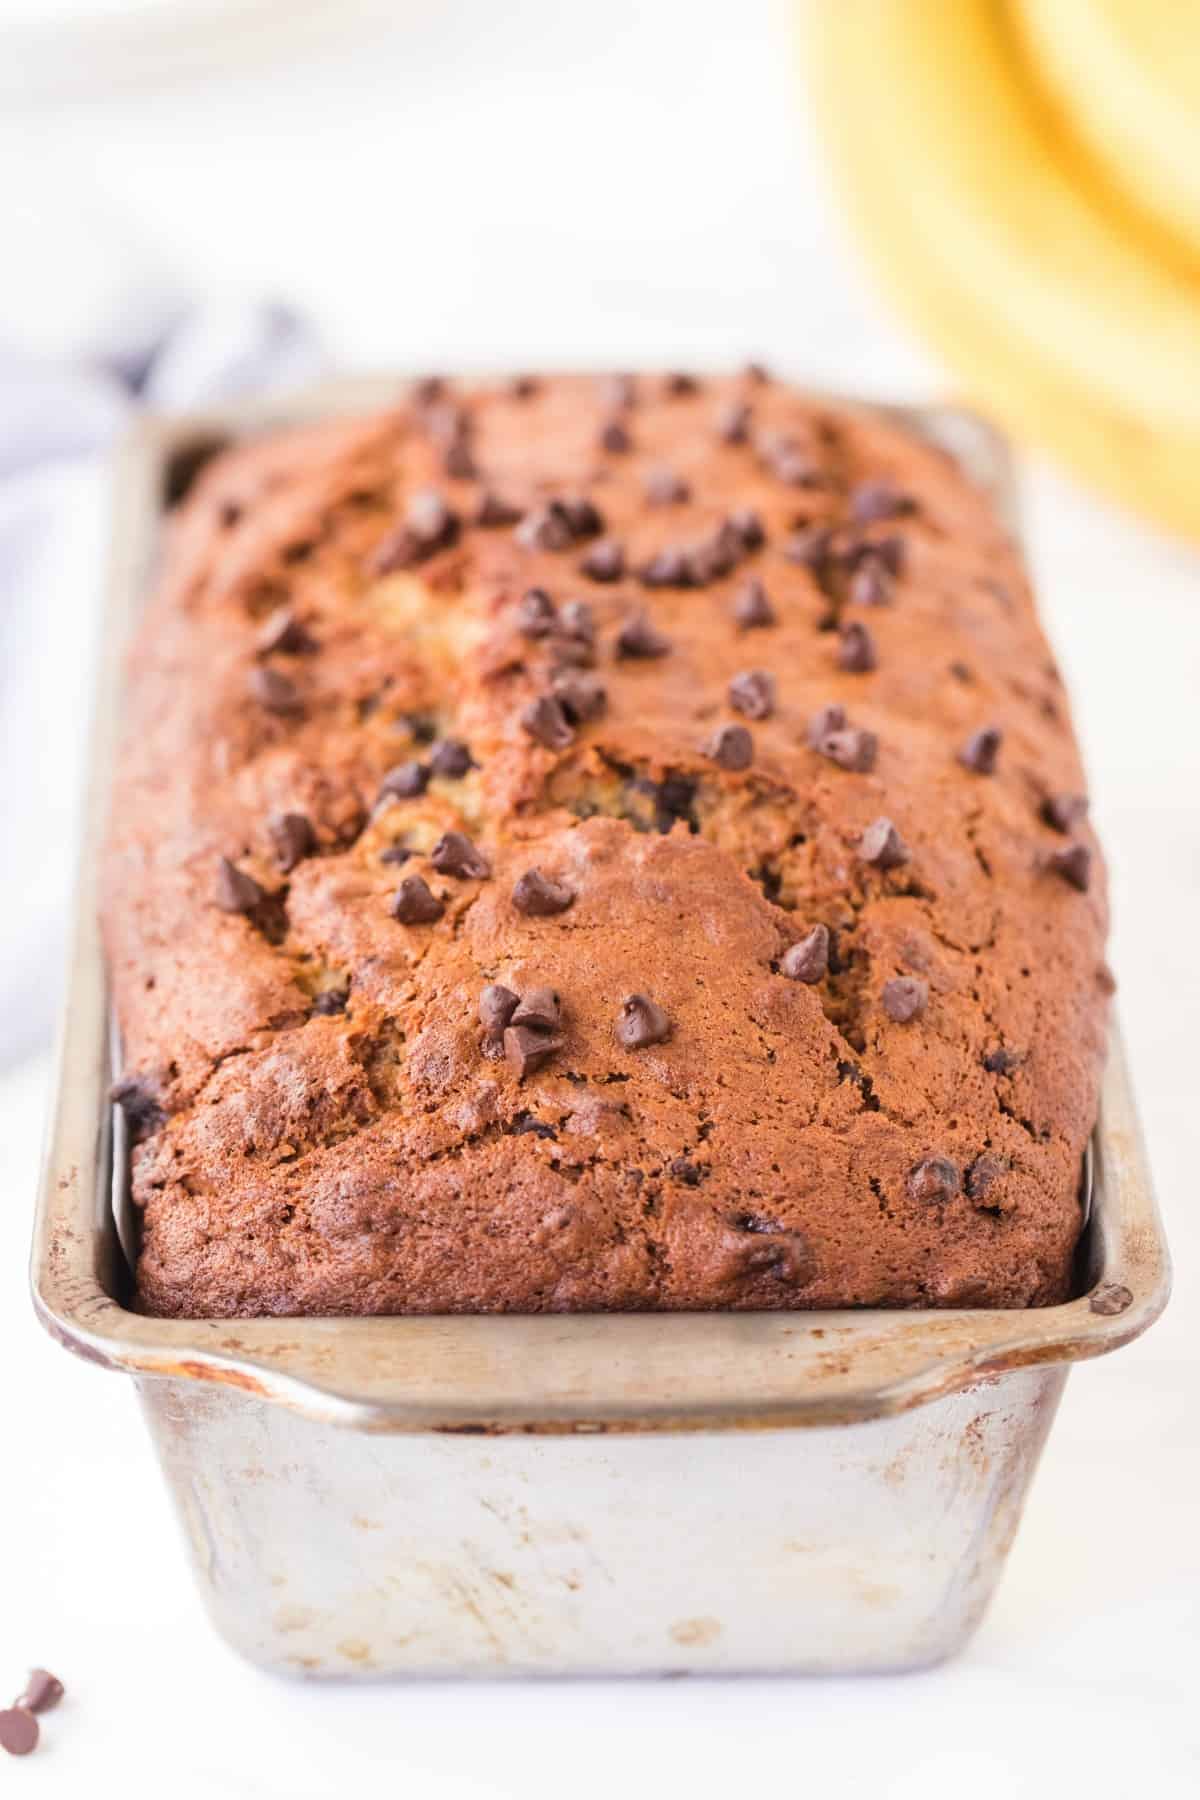 Loaf of banana bread with chocolate chips in a metal baking pan.